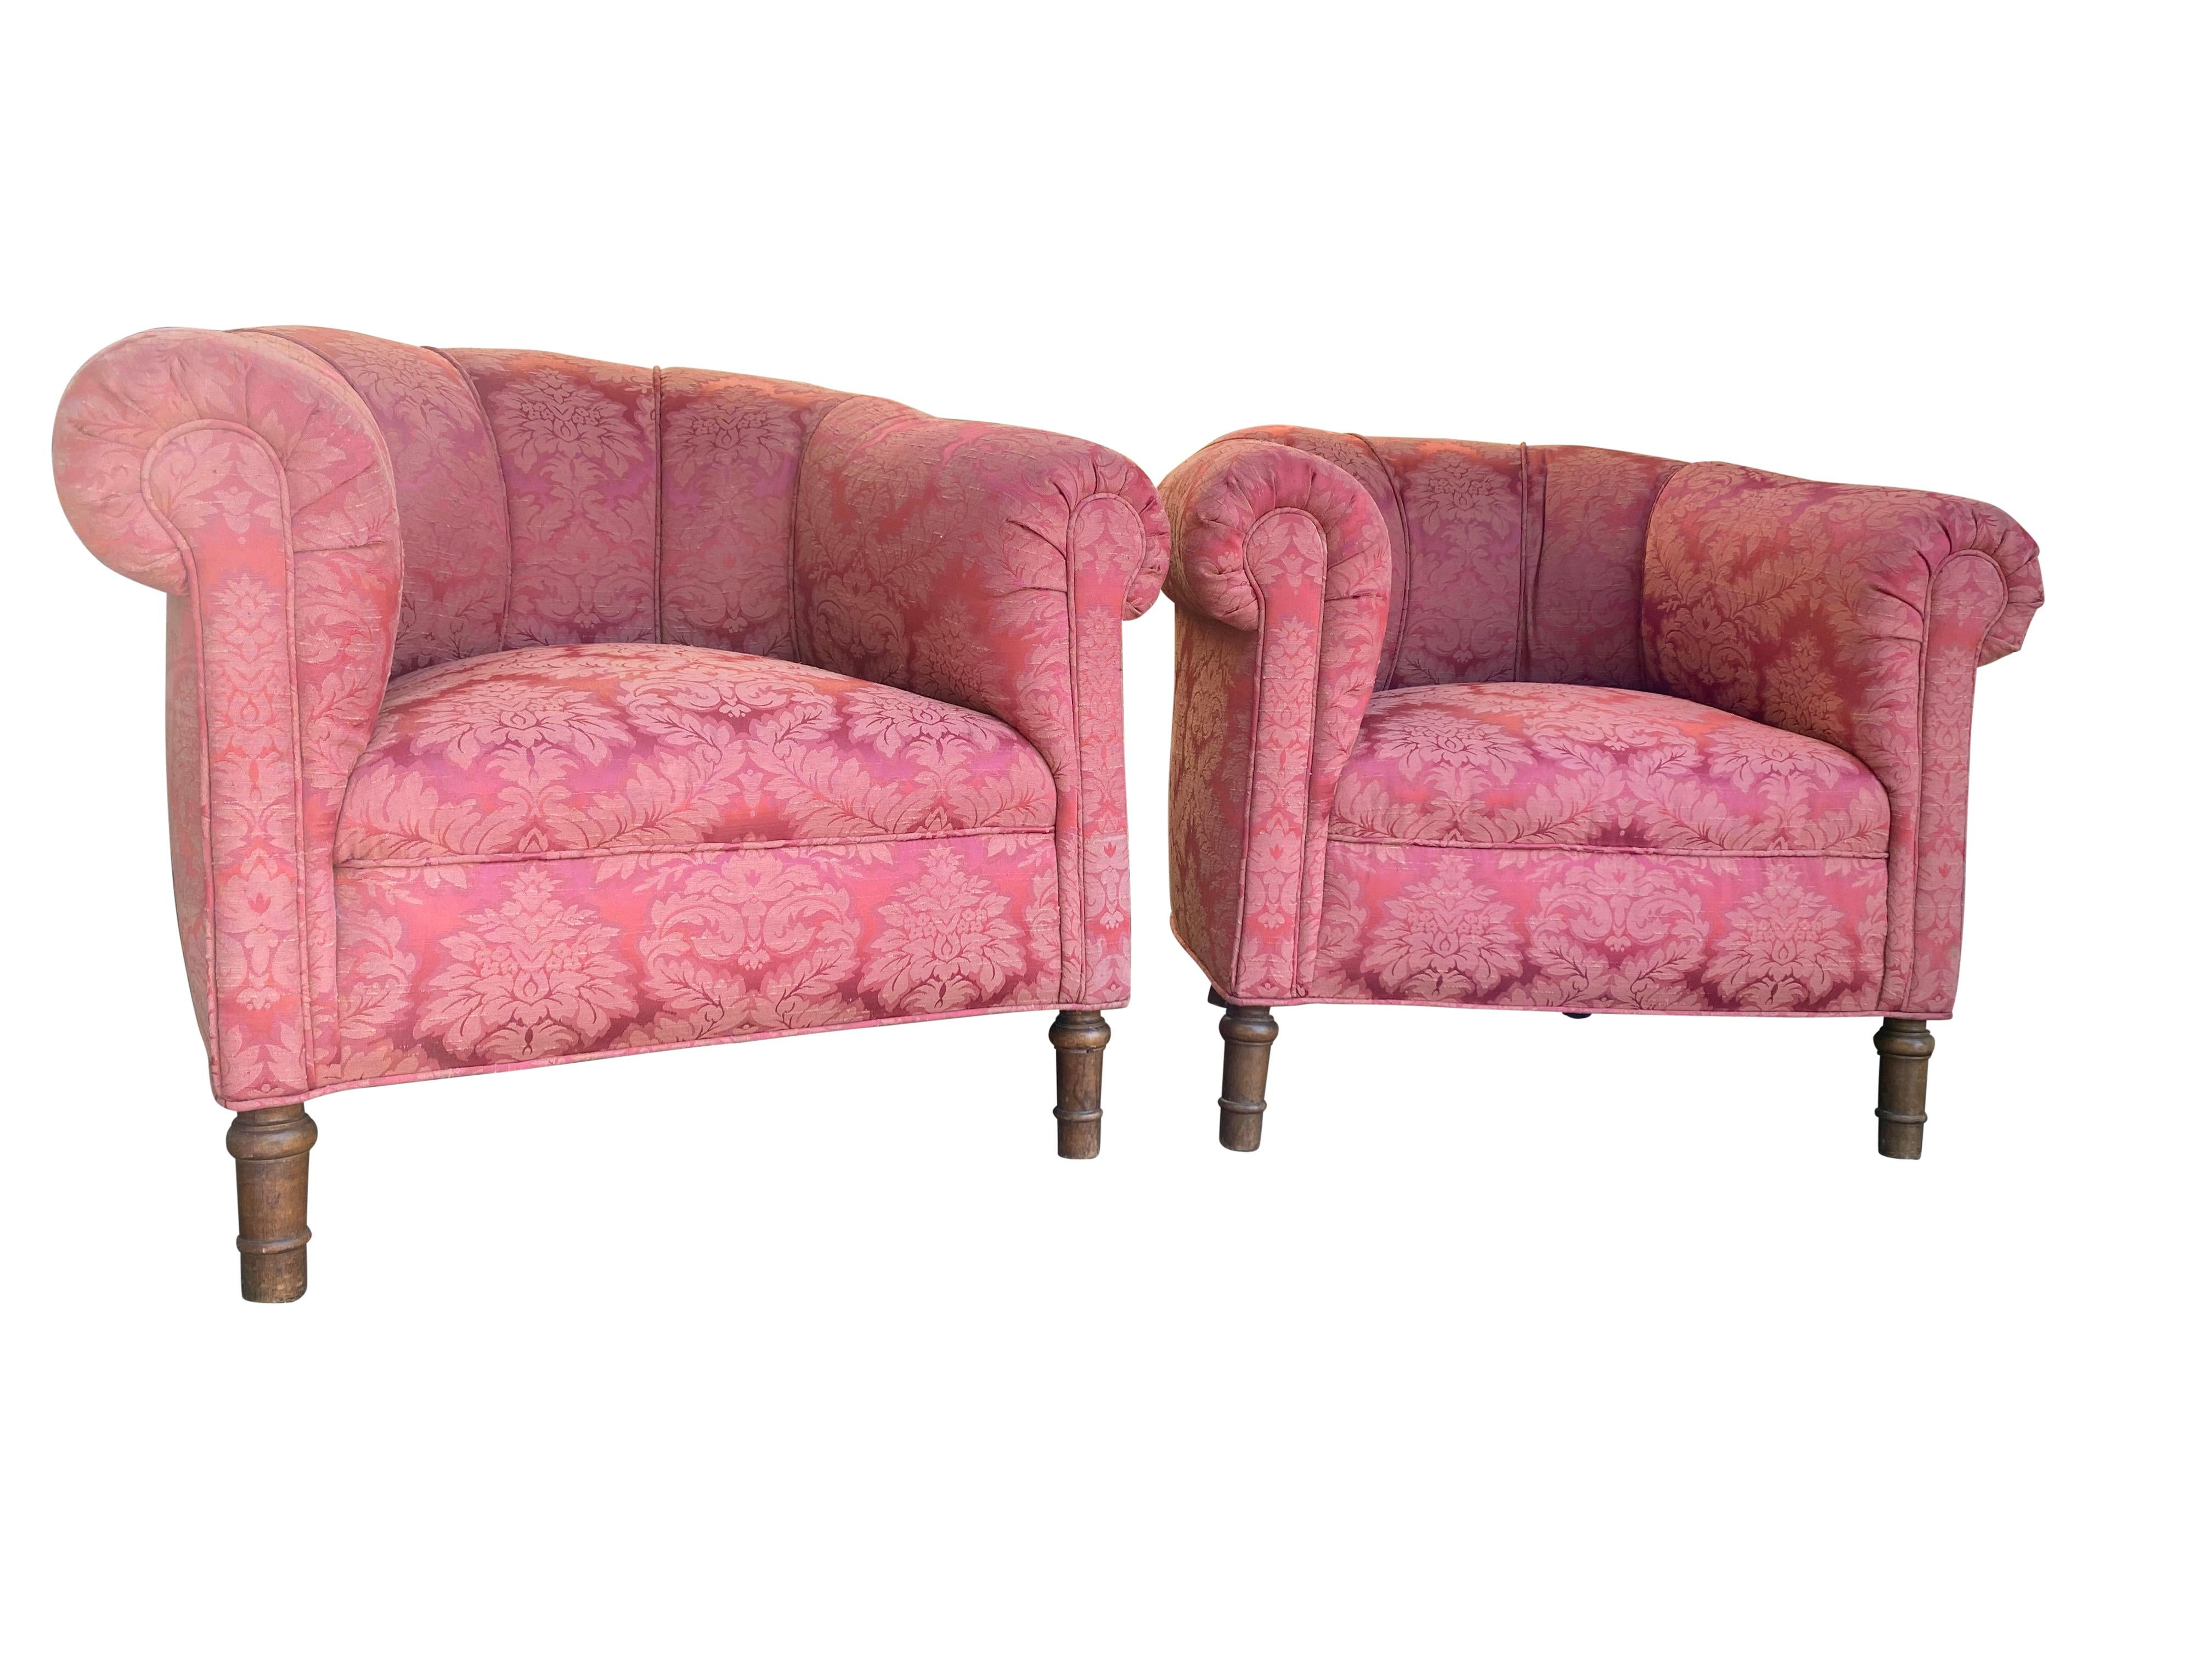 French Pair of 1920s Club Chairs in Damask Floral Design For Sale